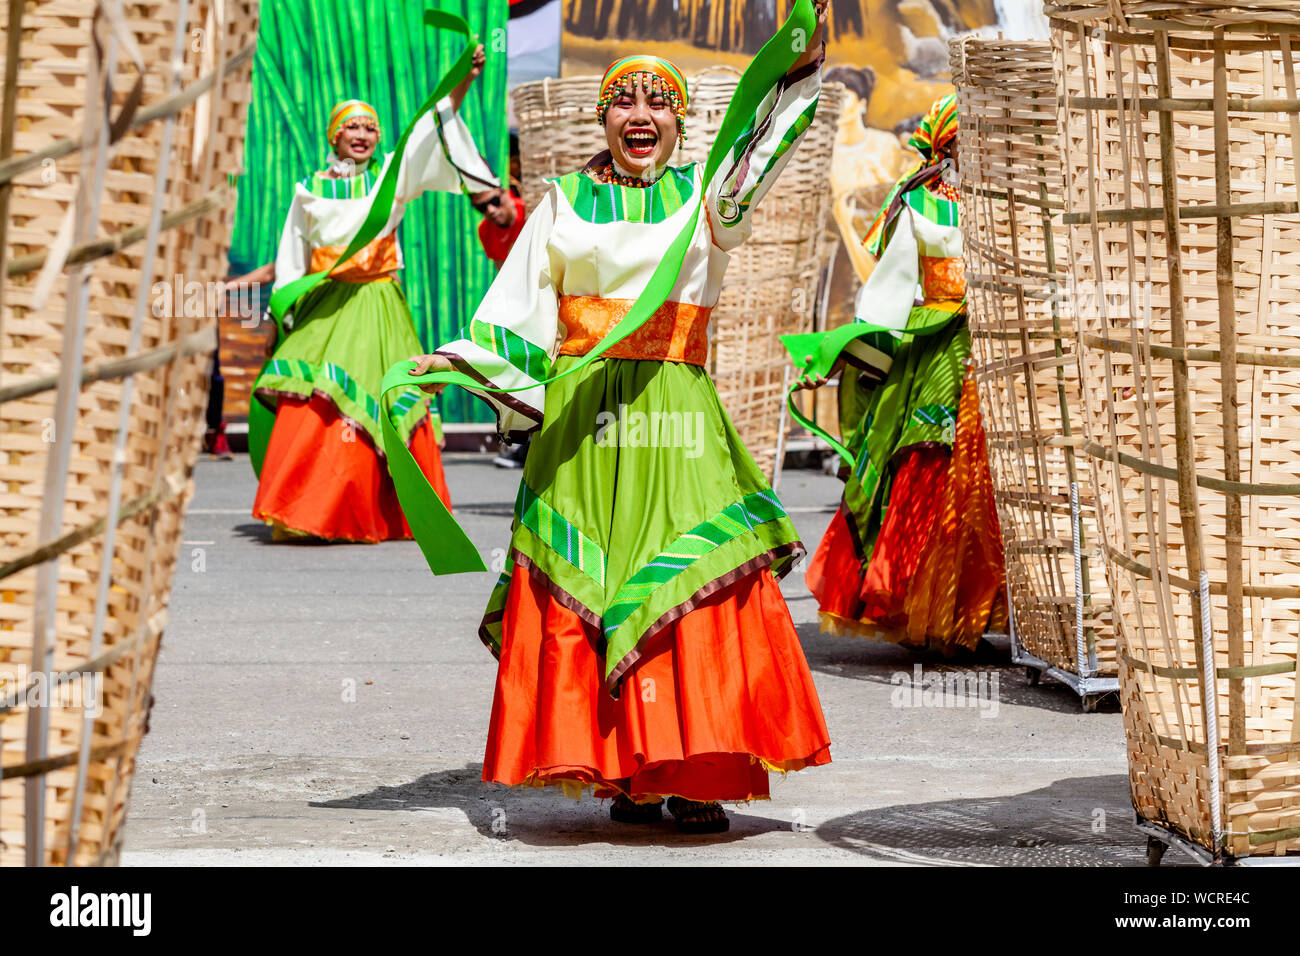 Young Filipino Women Performing In The Kasadyahan Contest, Dinagyang Festival, Iloilo City, Panay Island, The Philippines. Stock Photo